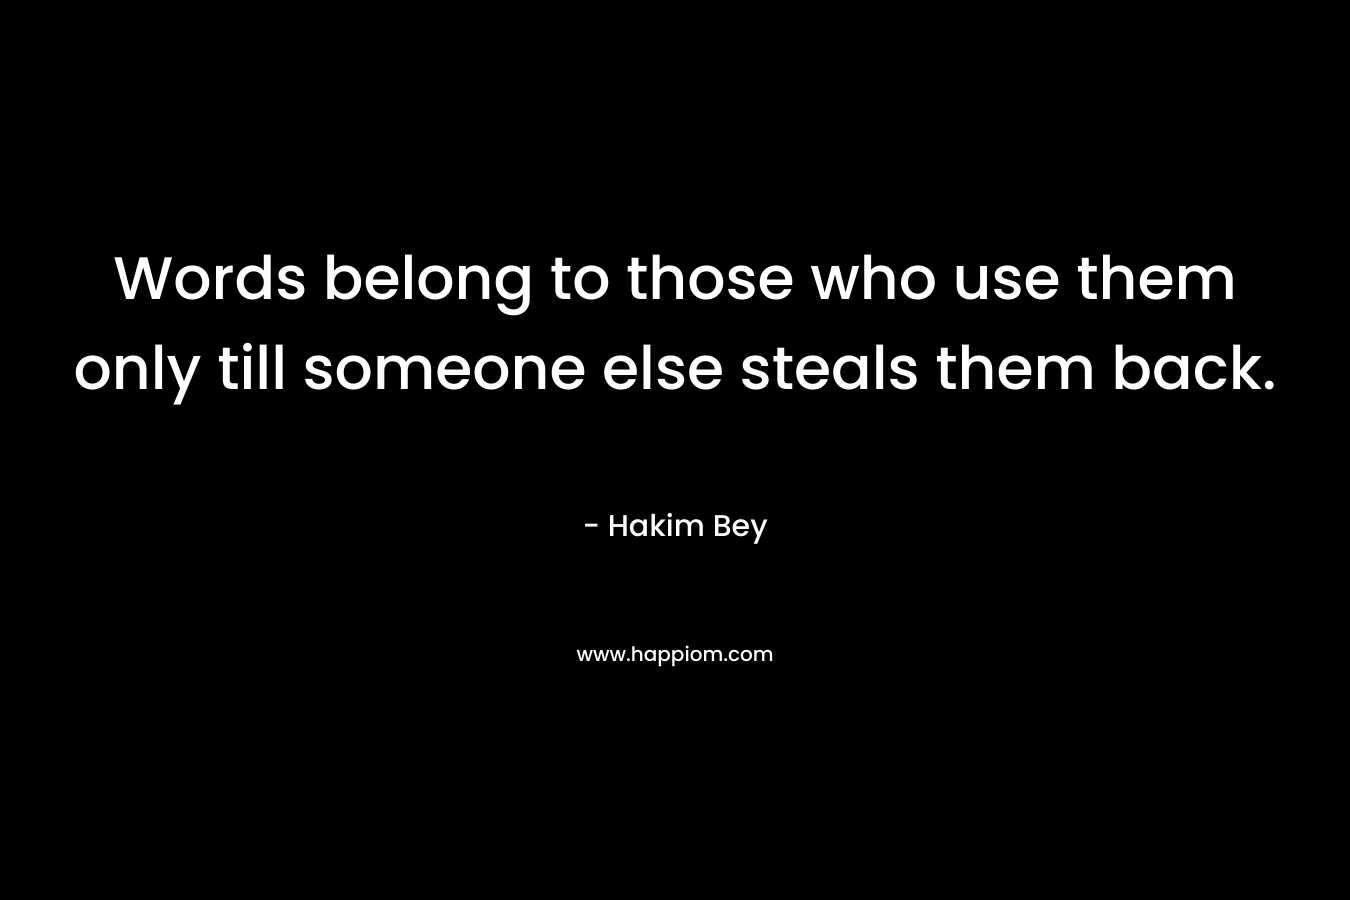 Words belong to those who use them only till someone else steals them back. – Hakim Bey